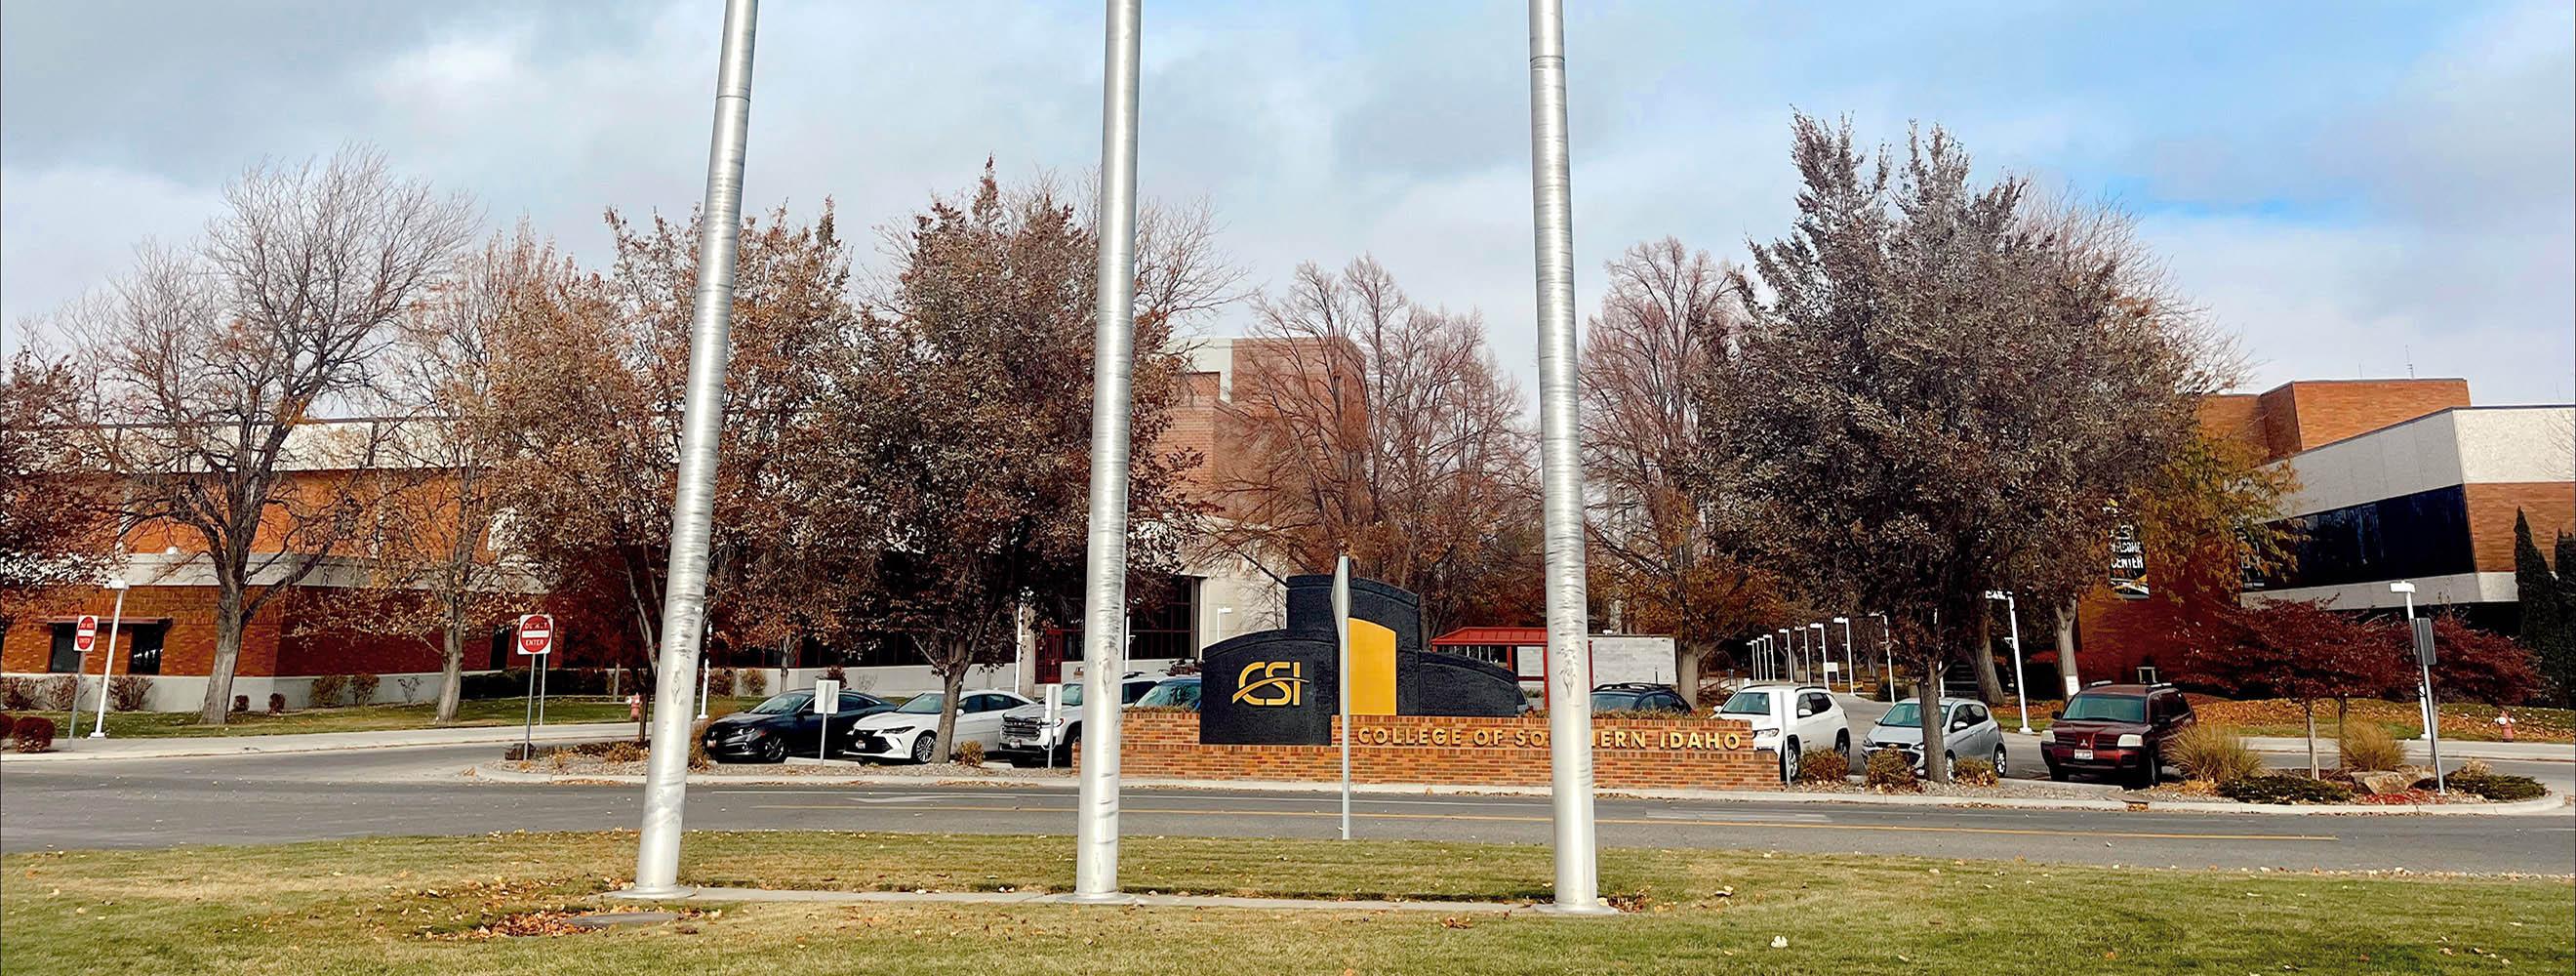 Main Campus Falls Avenue entrance with three large flag poles and sign of CSI